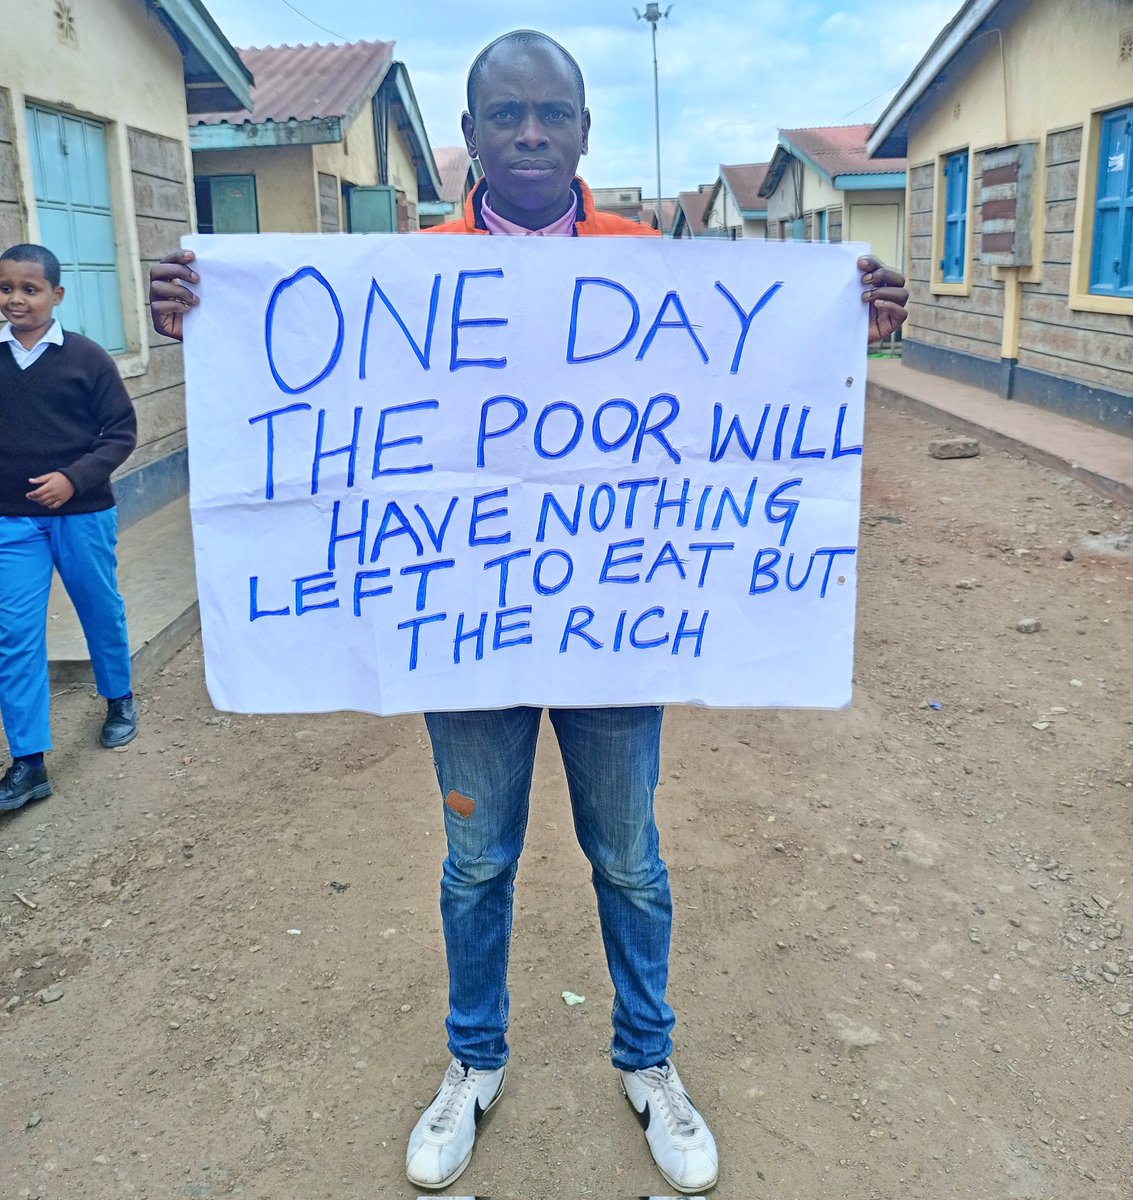 One day the poor will have nothing left to eat but the rich. #NoToOverTaxation 
#LowerFoodPrices
@UhaiWetu @KariobangiSJC @suicultura19 @Article43Rights